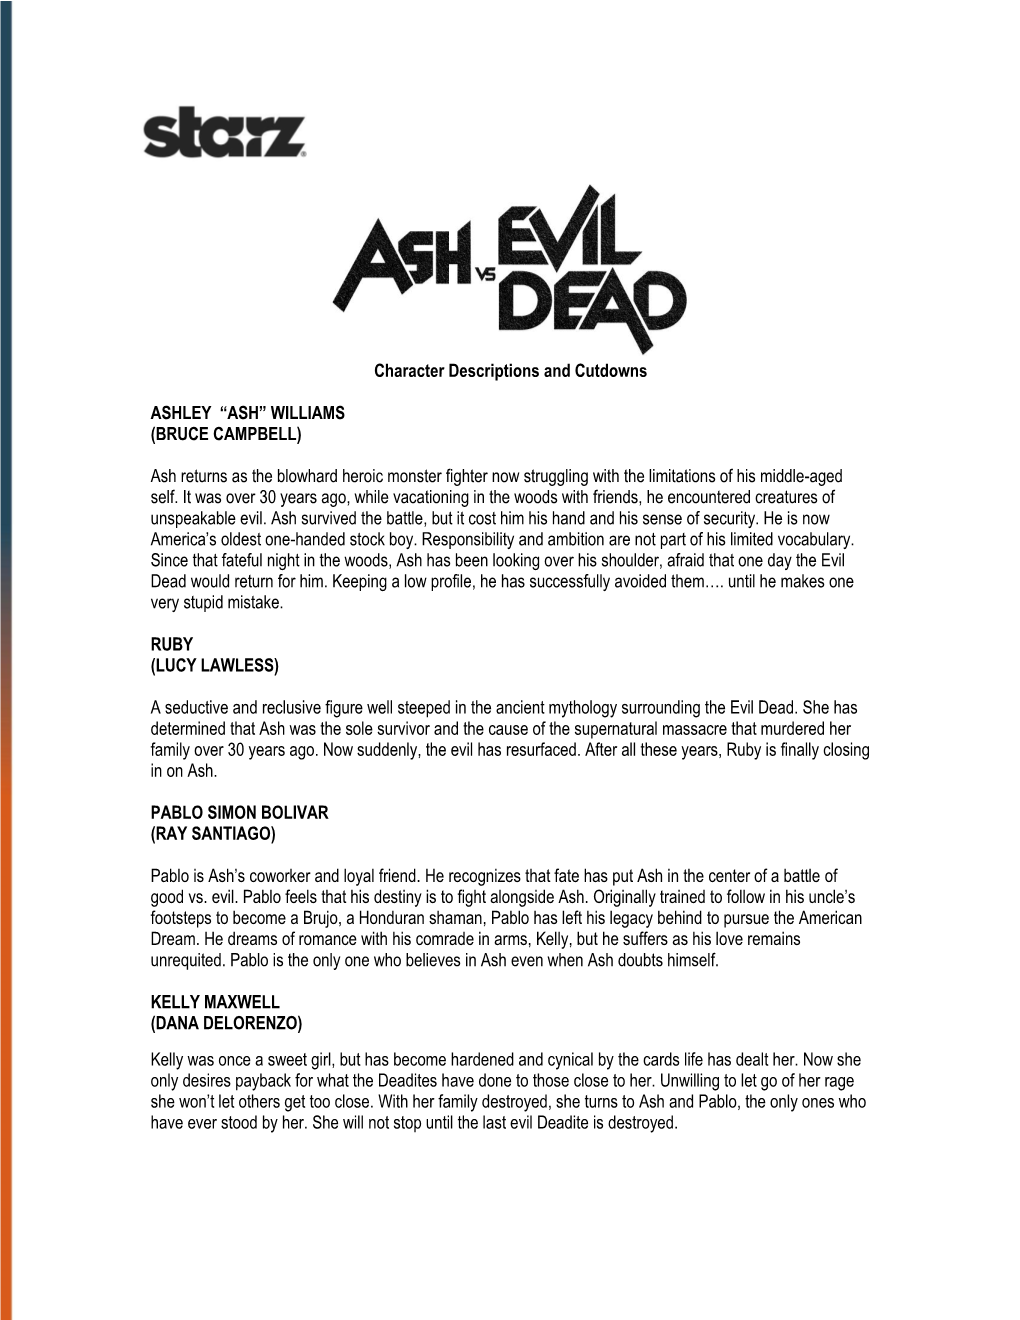 Character Descriptions and Cutdowns ASHLEY “ASH” WILLIAMS